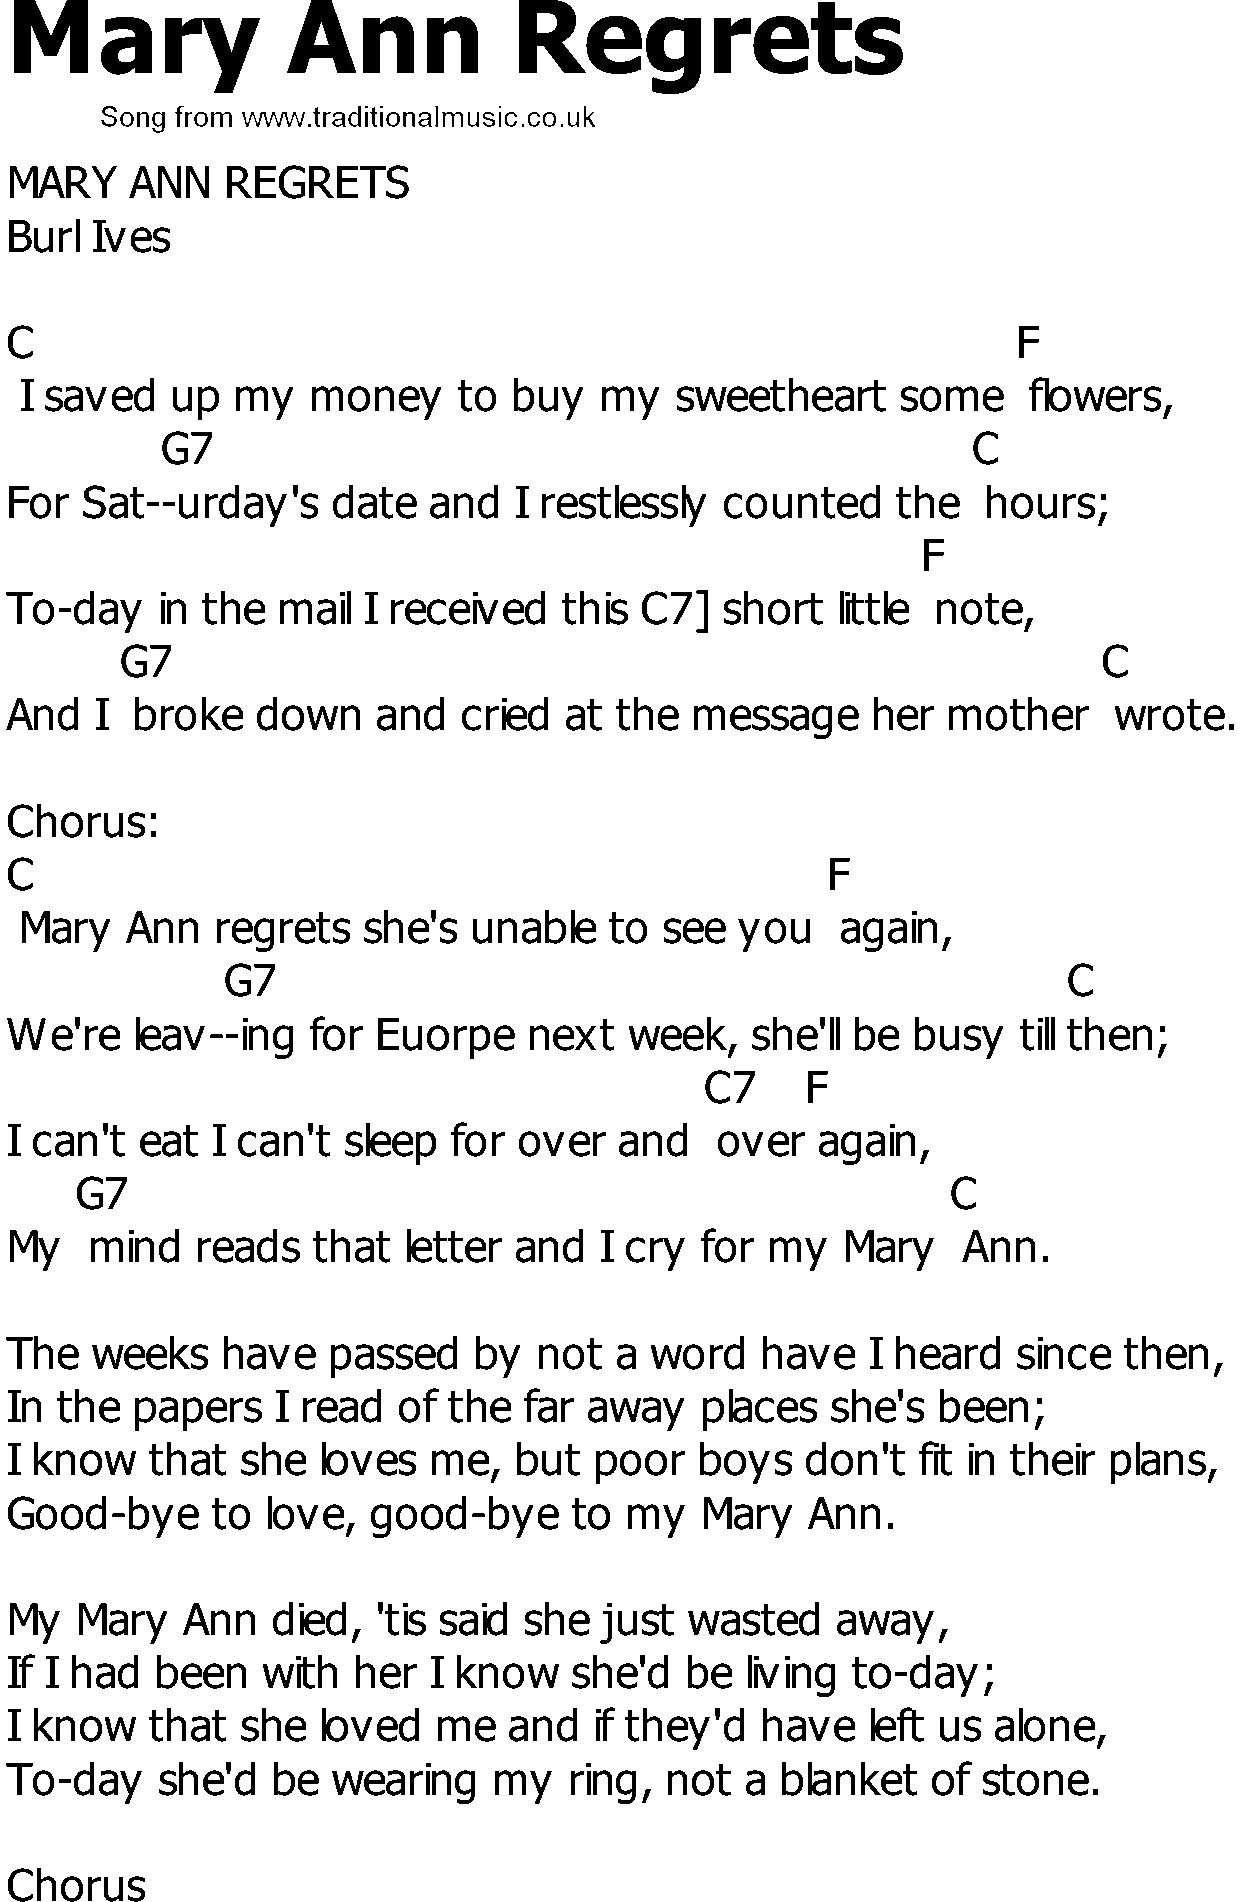 Old Country song lyrics with chords - Mary Ann Regrets